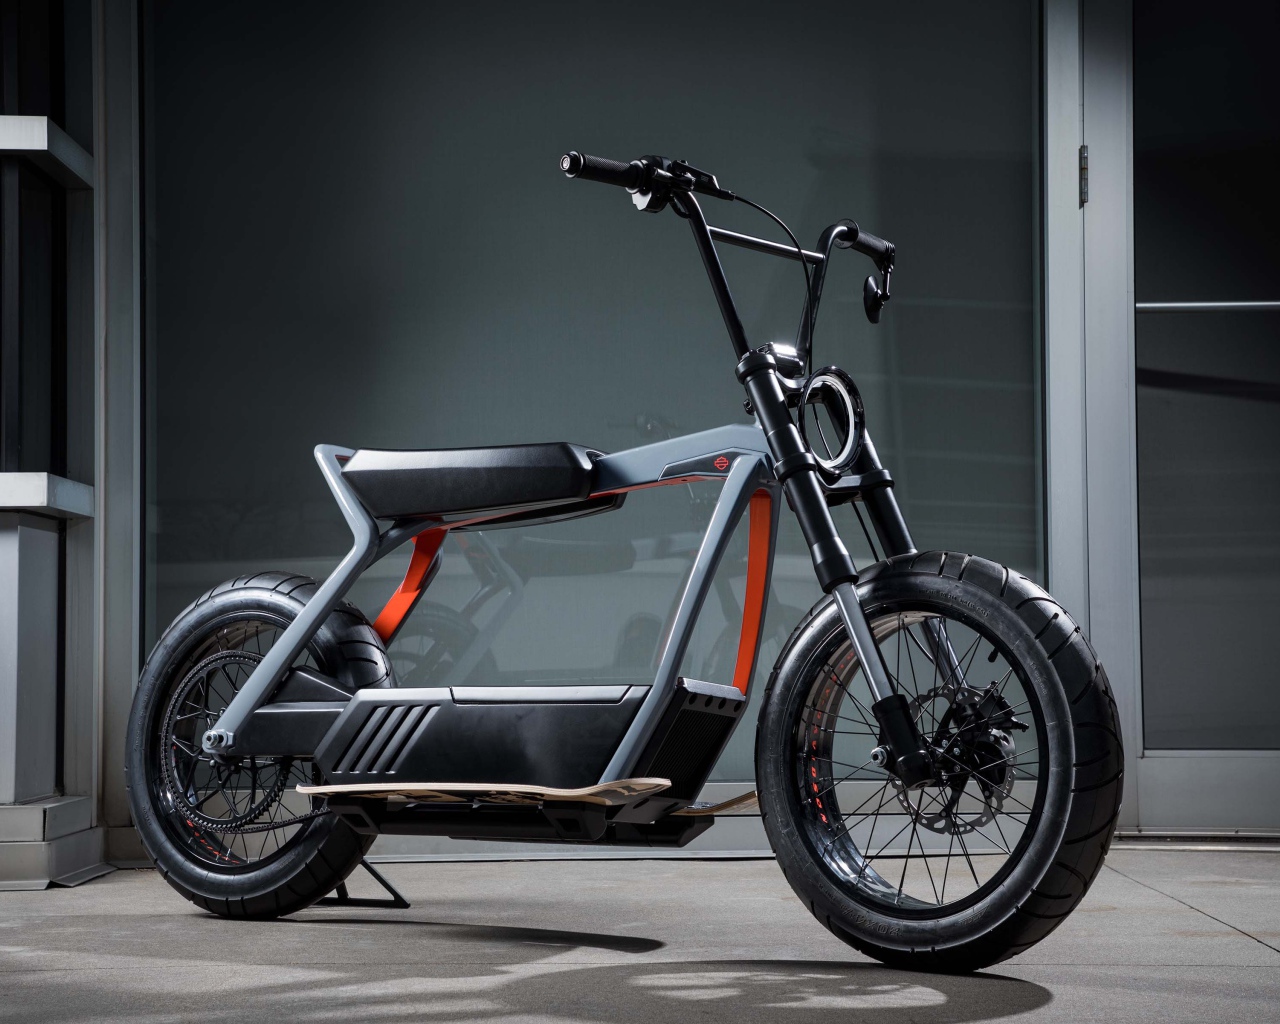 New electric motorcycle Harley-Davidson 2020